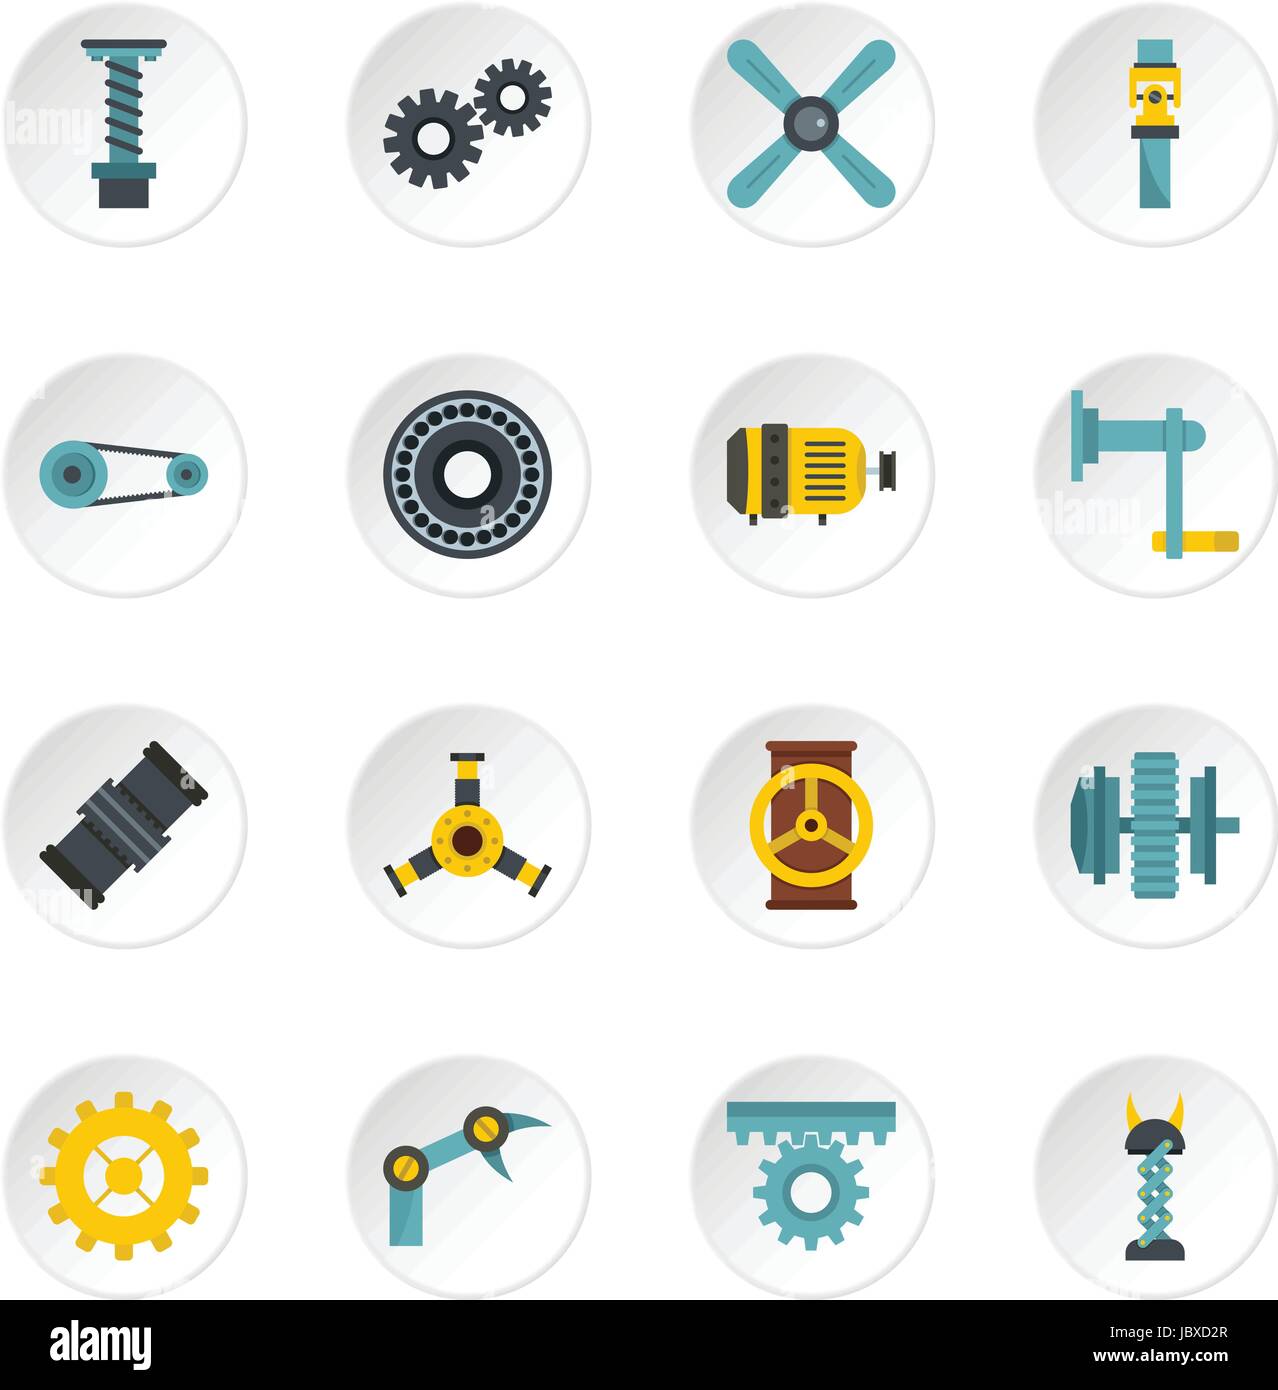 Techno mechanisms kit icons set in flat style Stock Vector